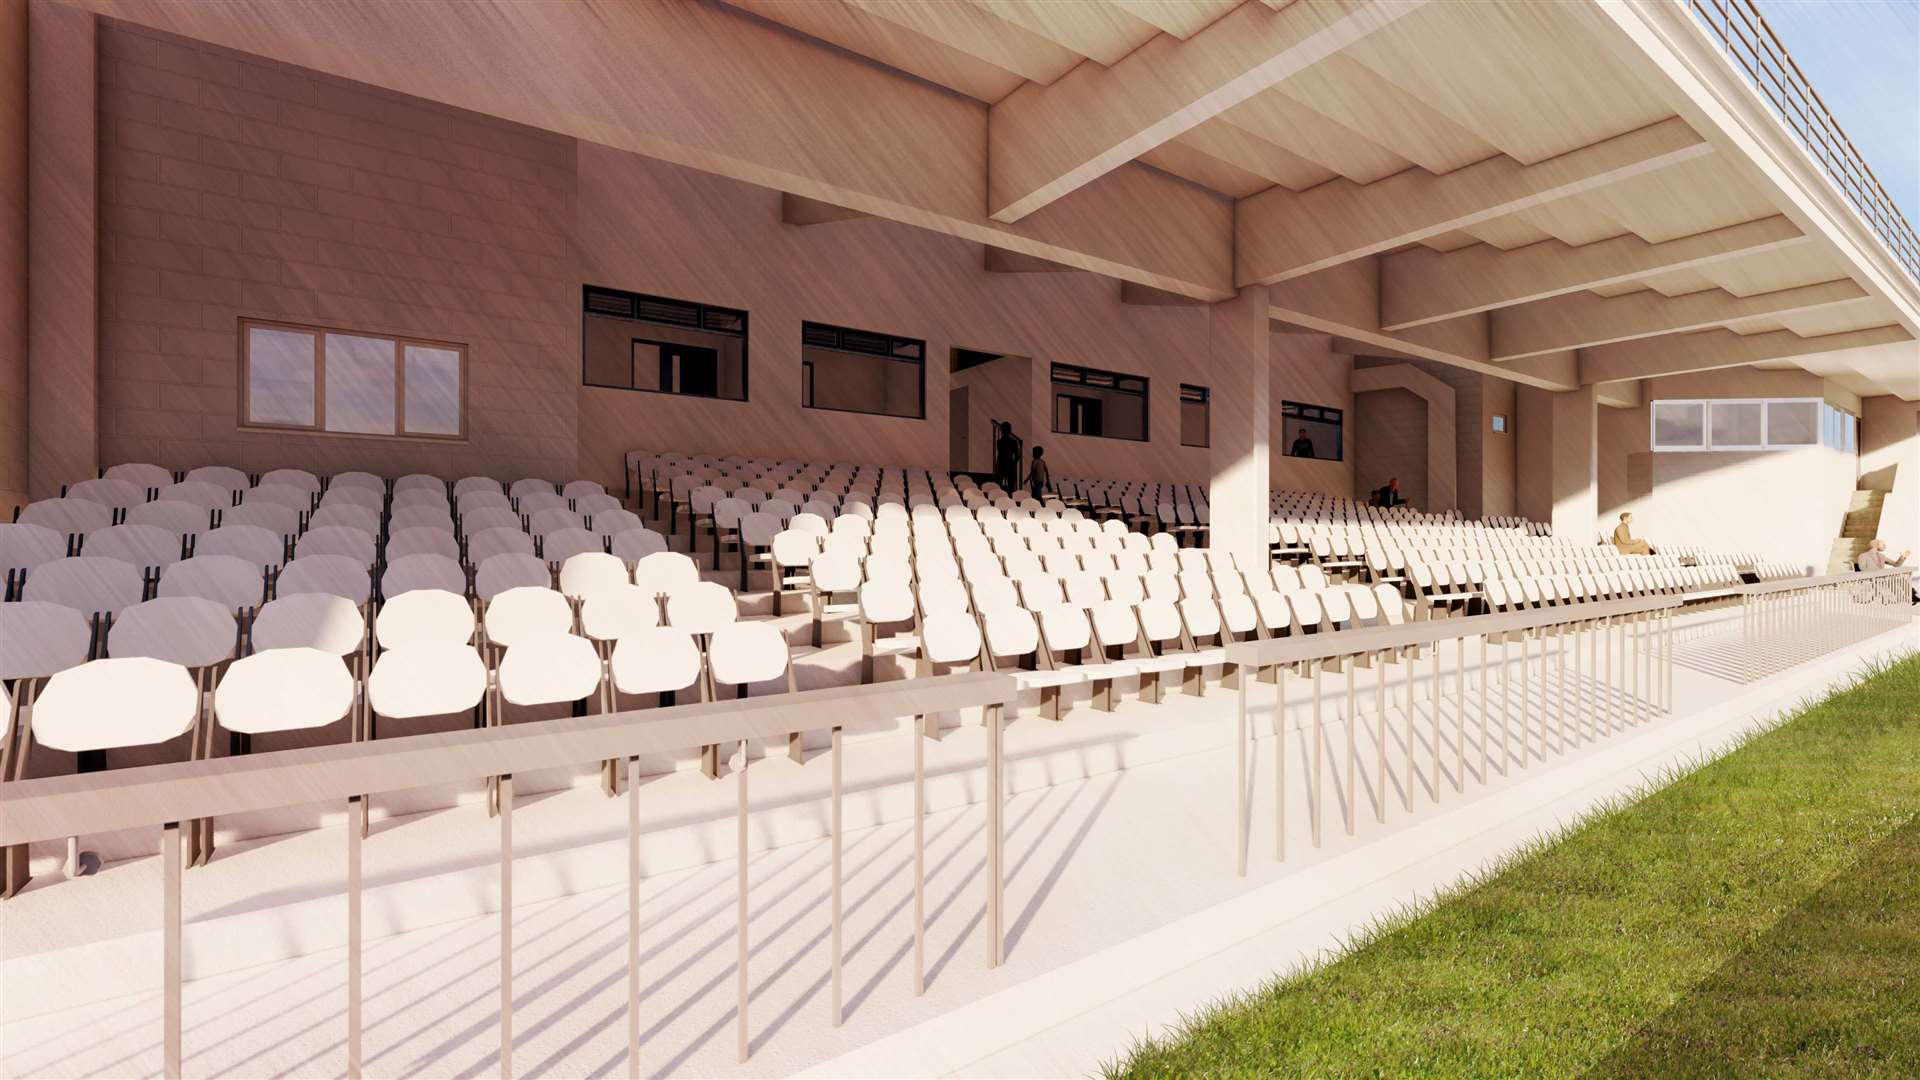 The new stands will introduce new boxes for coaches and officials